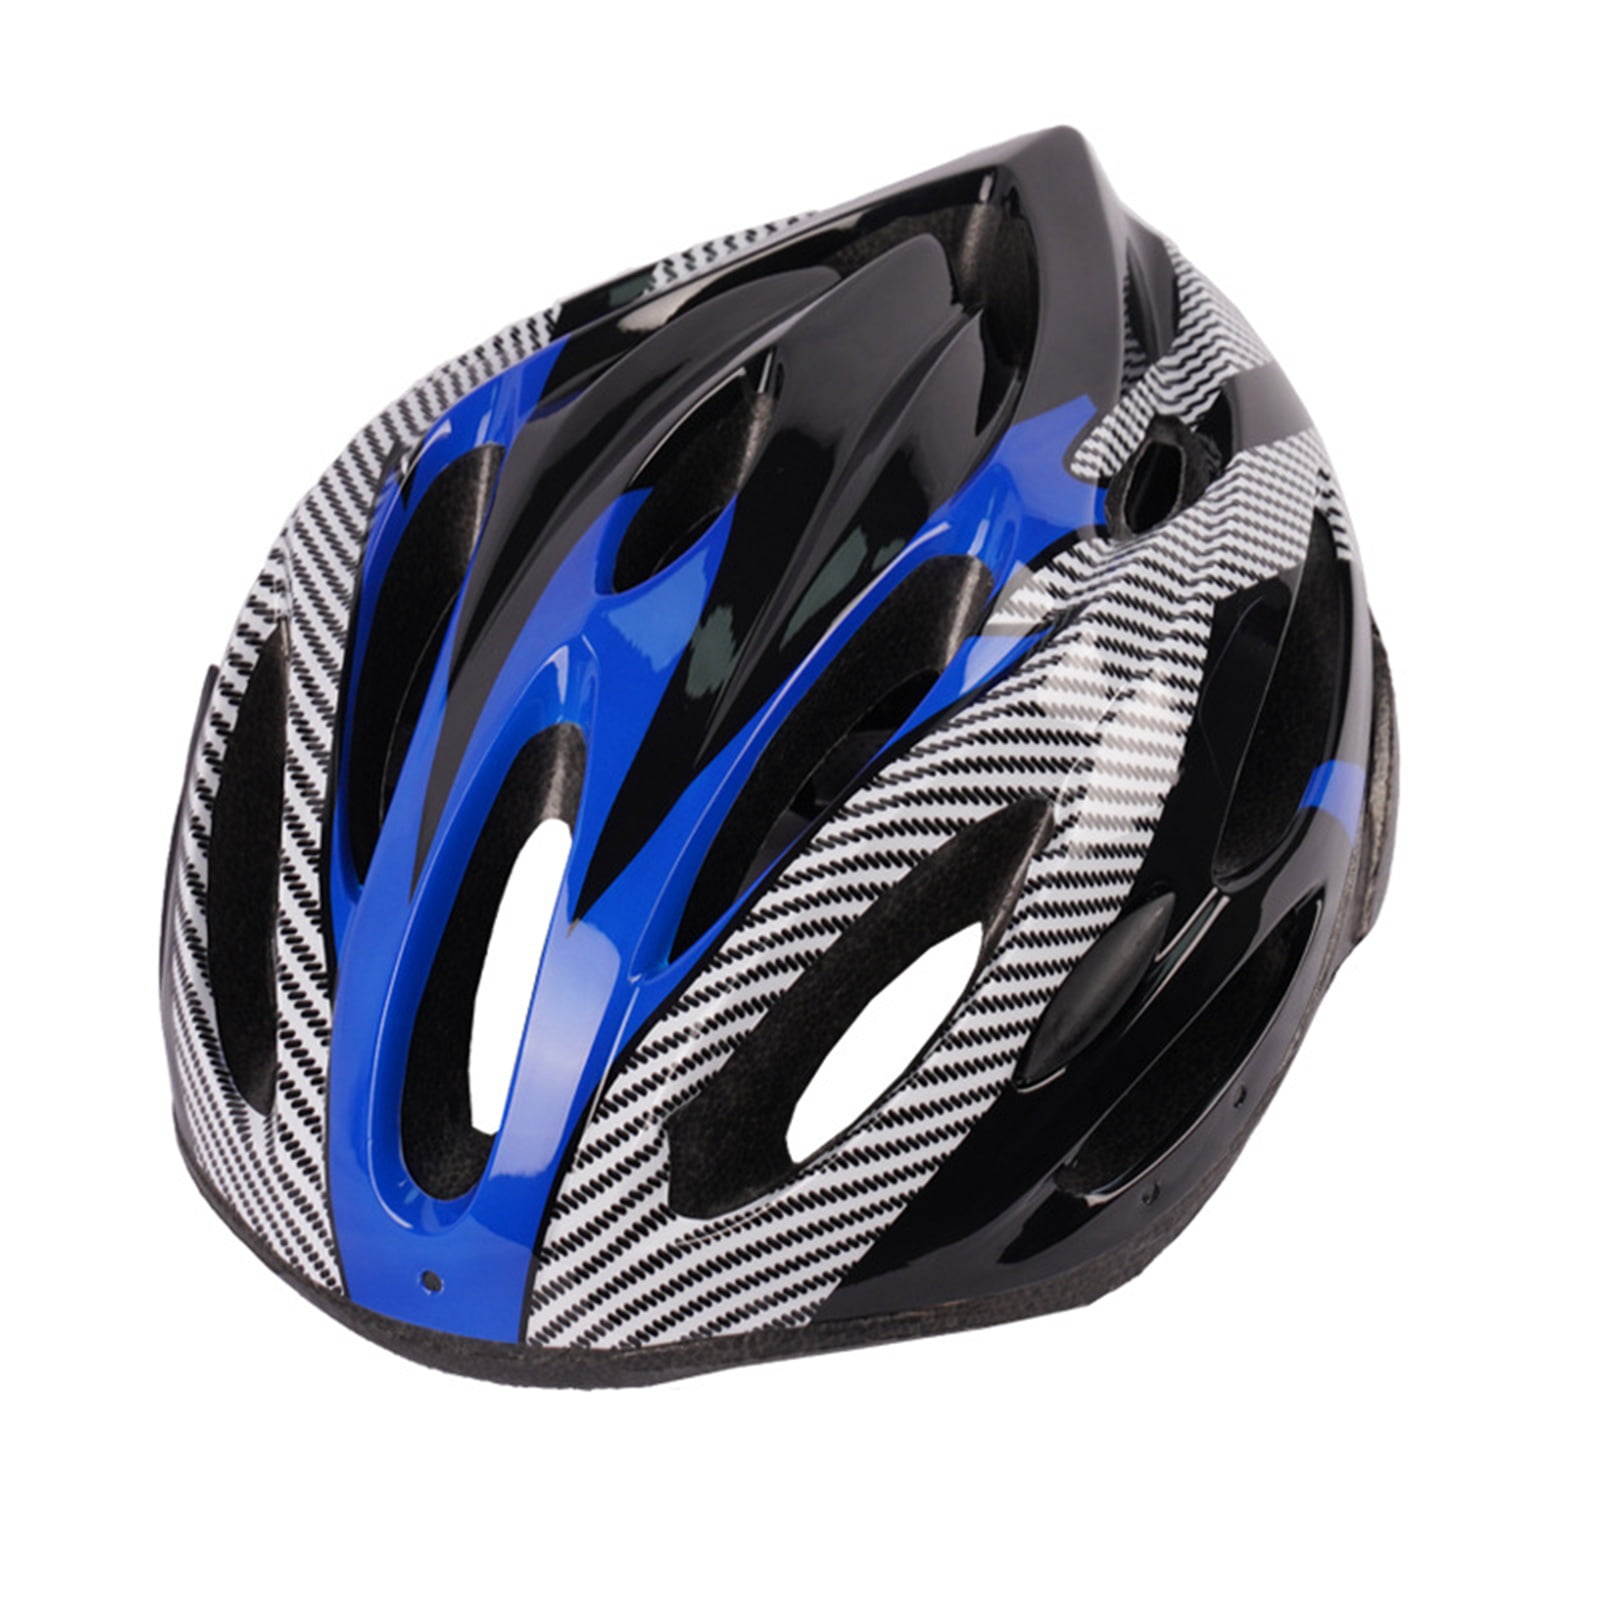 Protective Mens Adult Road Cycling Safety Helmet MTB Mountain Bike Bicycle Sport 